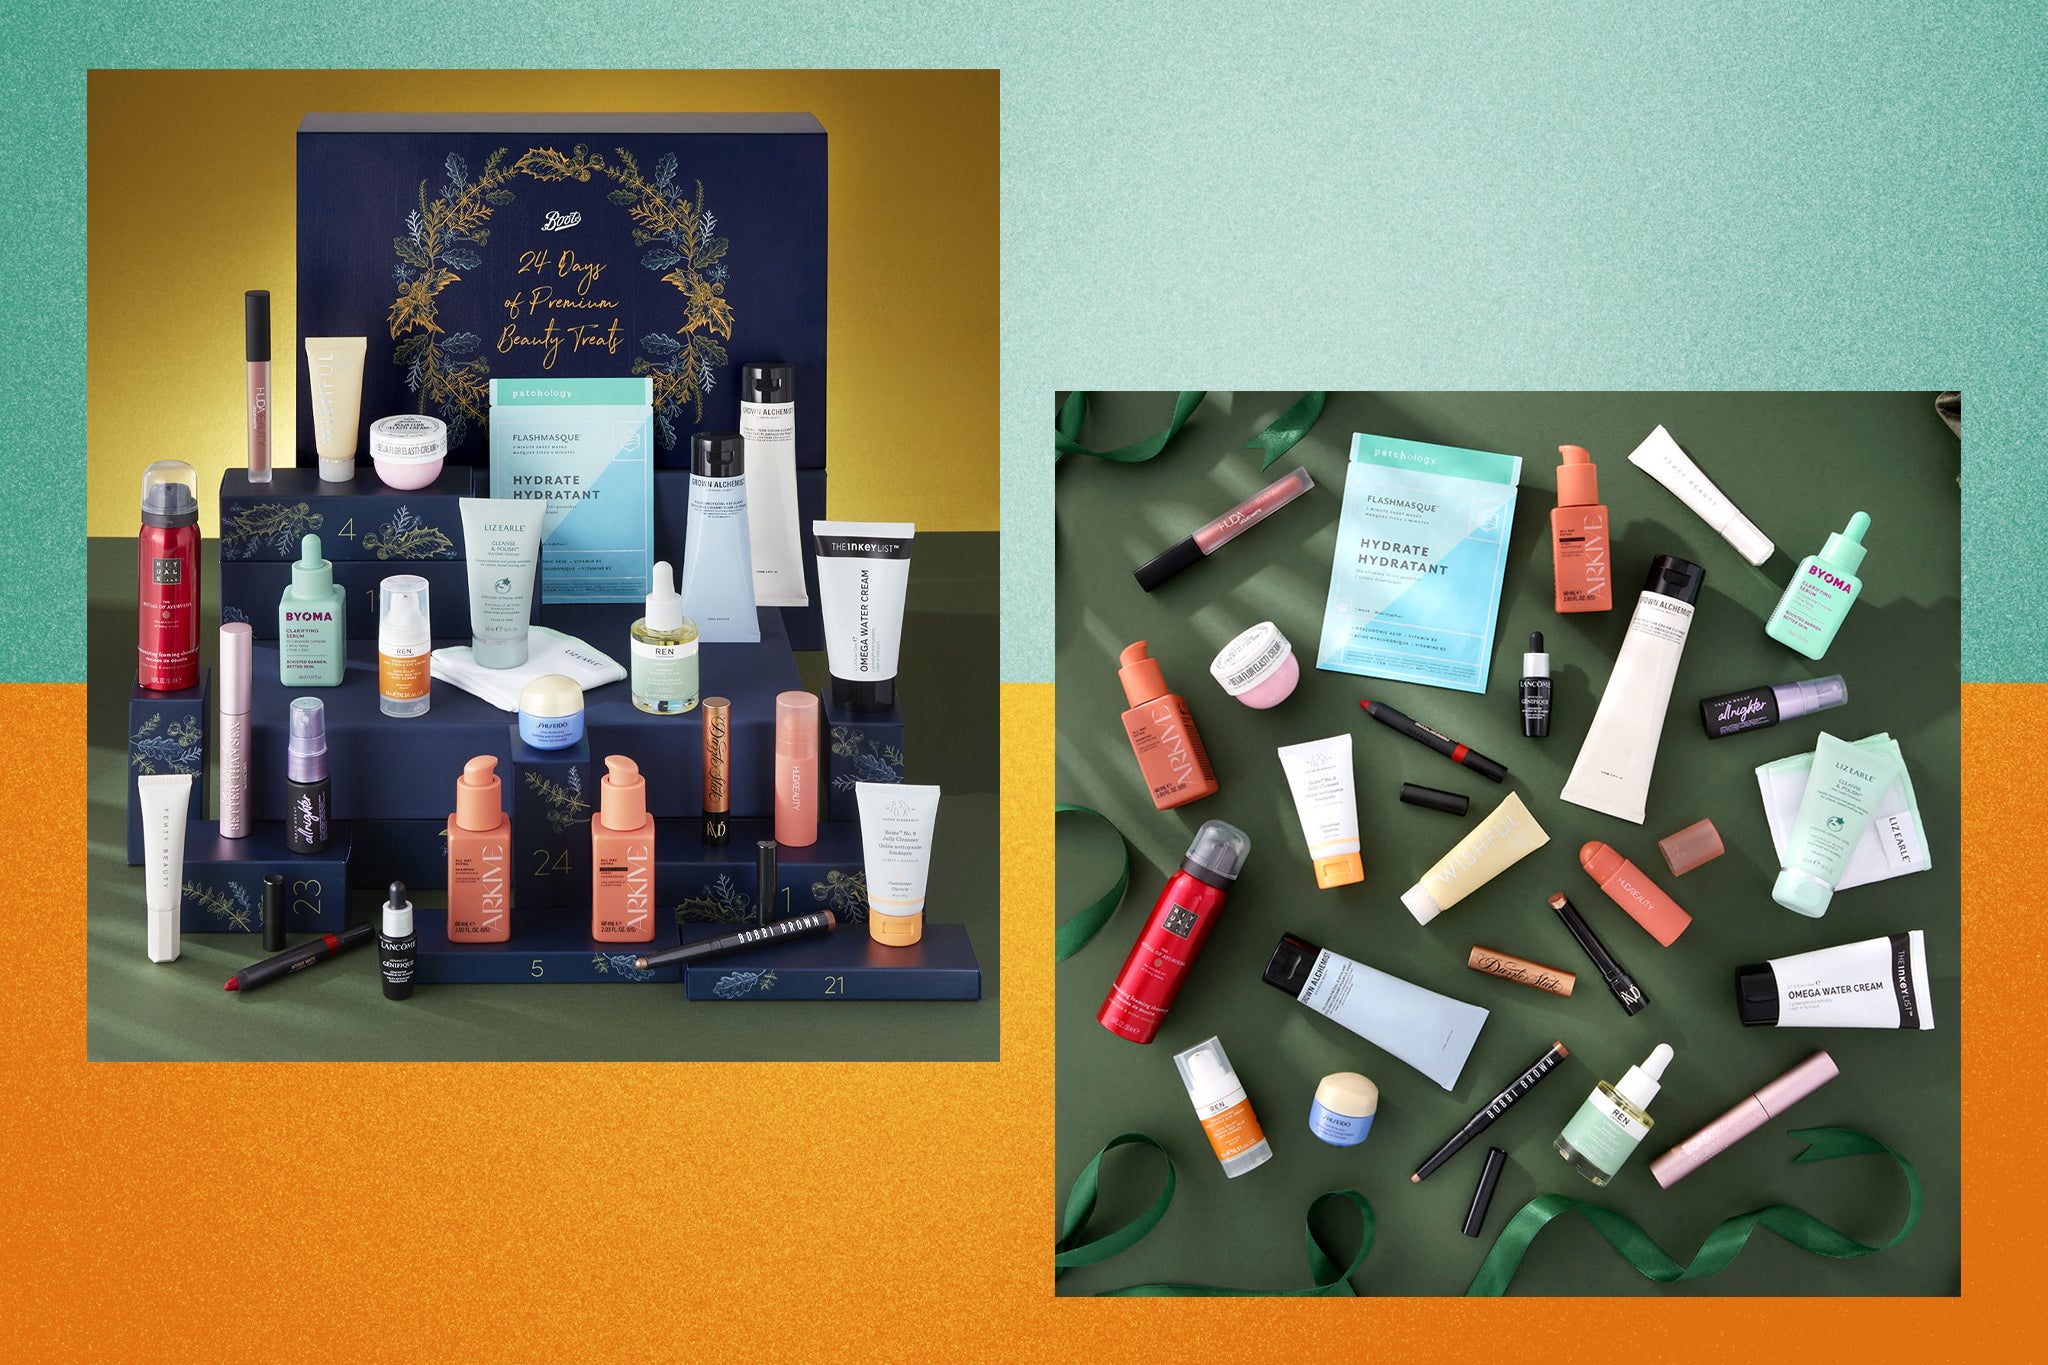 Boots s premium beauty advent calendar costs less than £100 but what